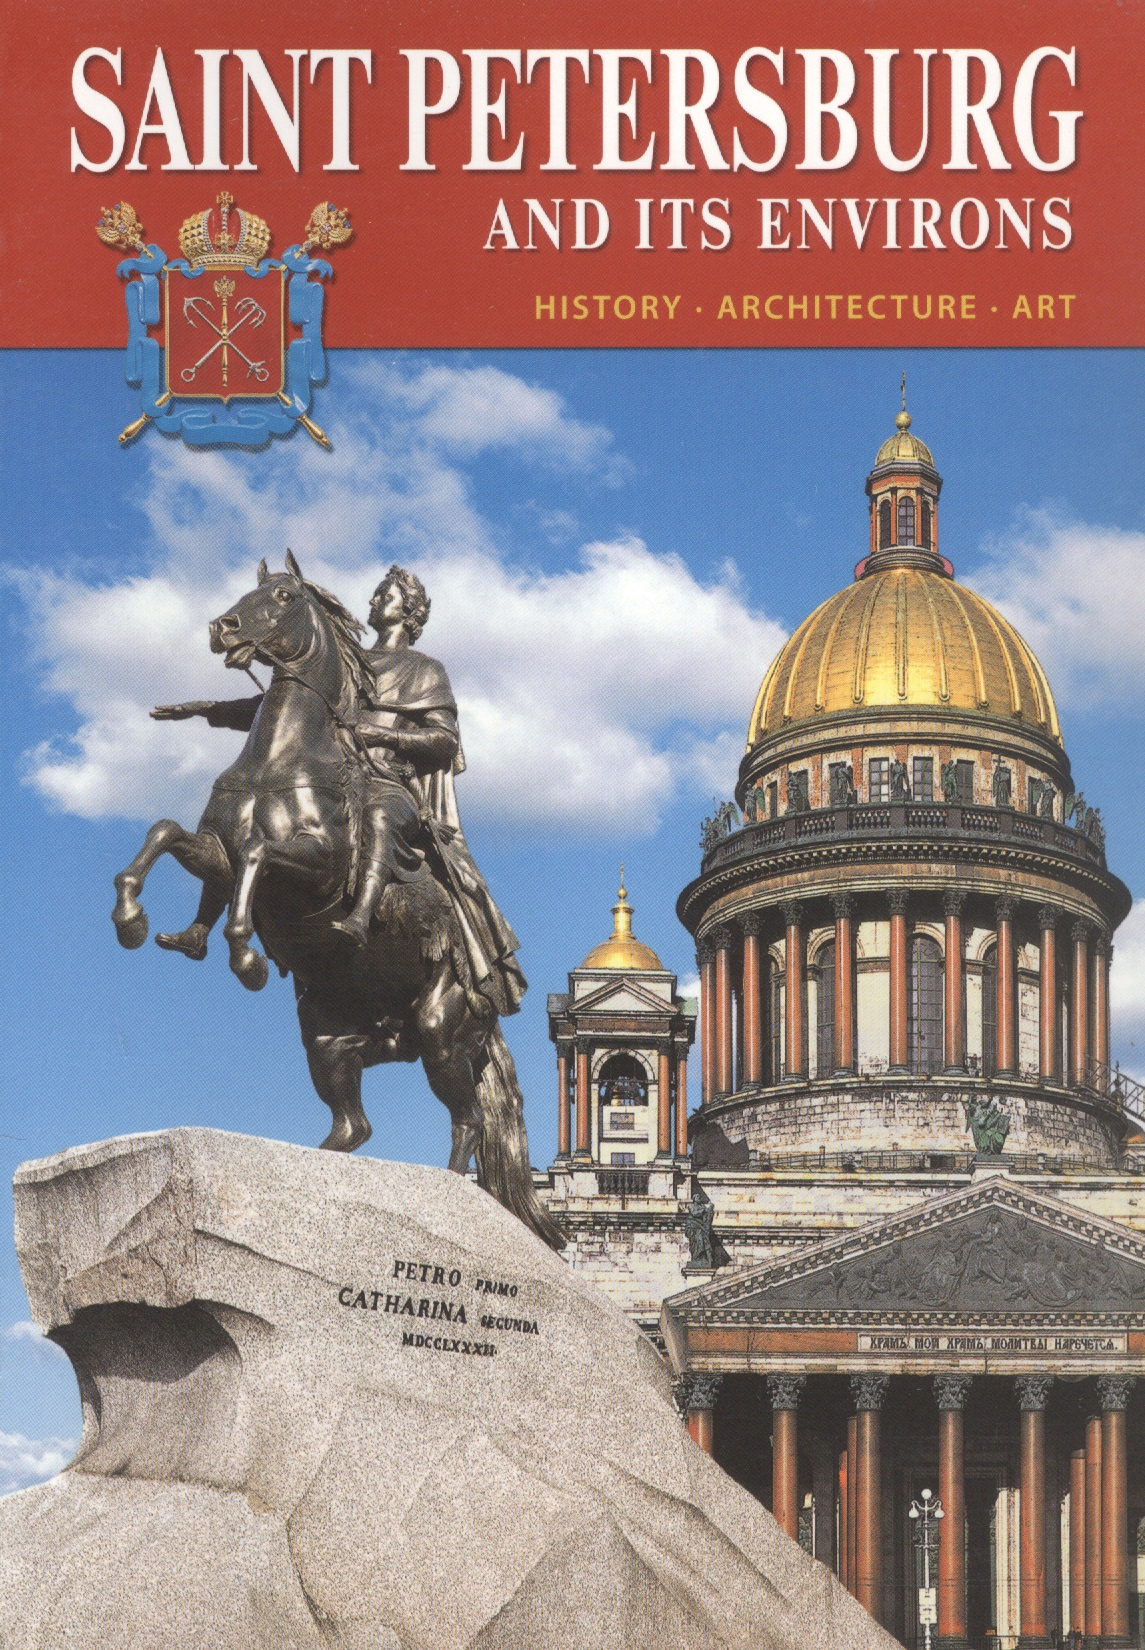 Saint-Petersburg and its environs. History, architecture, art. -   . 